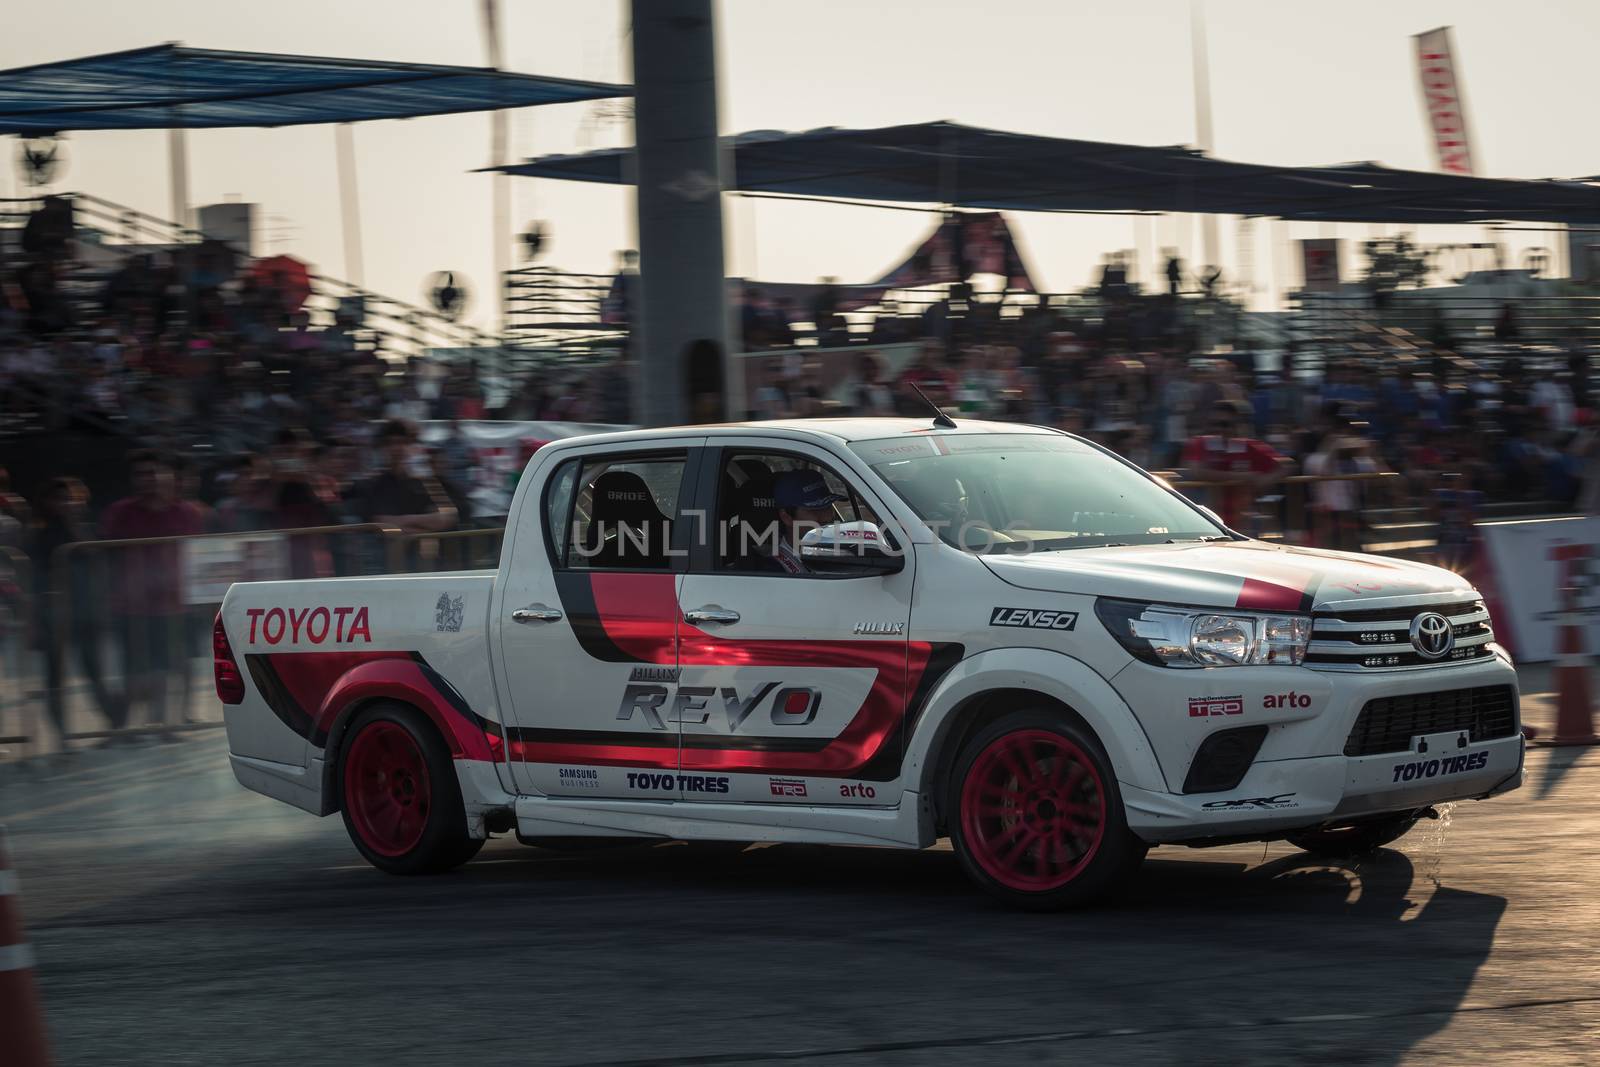 Udon Thani, Thailand - October 18, 2015: Masato Kawabata the driver of Toyota Hilux Revo perform drifting contest on the track between driver from Thailand and Japan at the event Toyota Motor Sport show at Udon Thani, Thailand with motion blur of the background and smoke of the burning tires